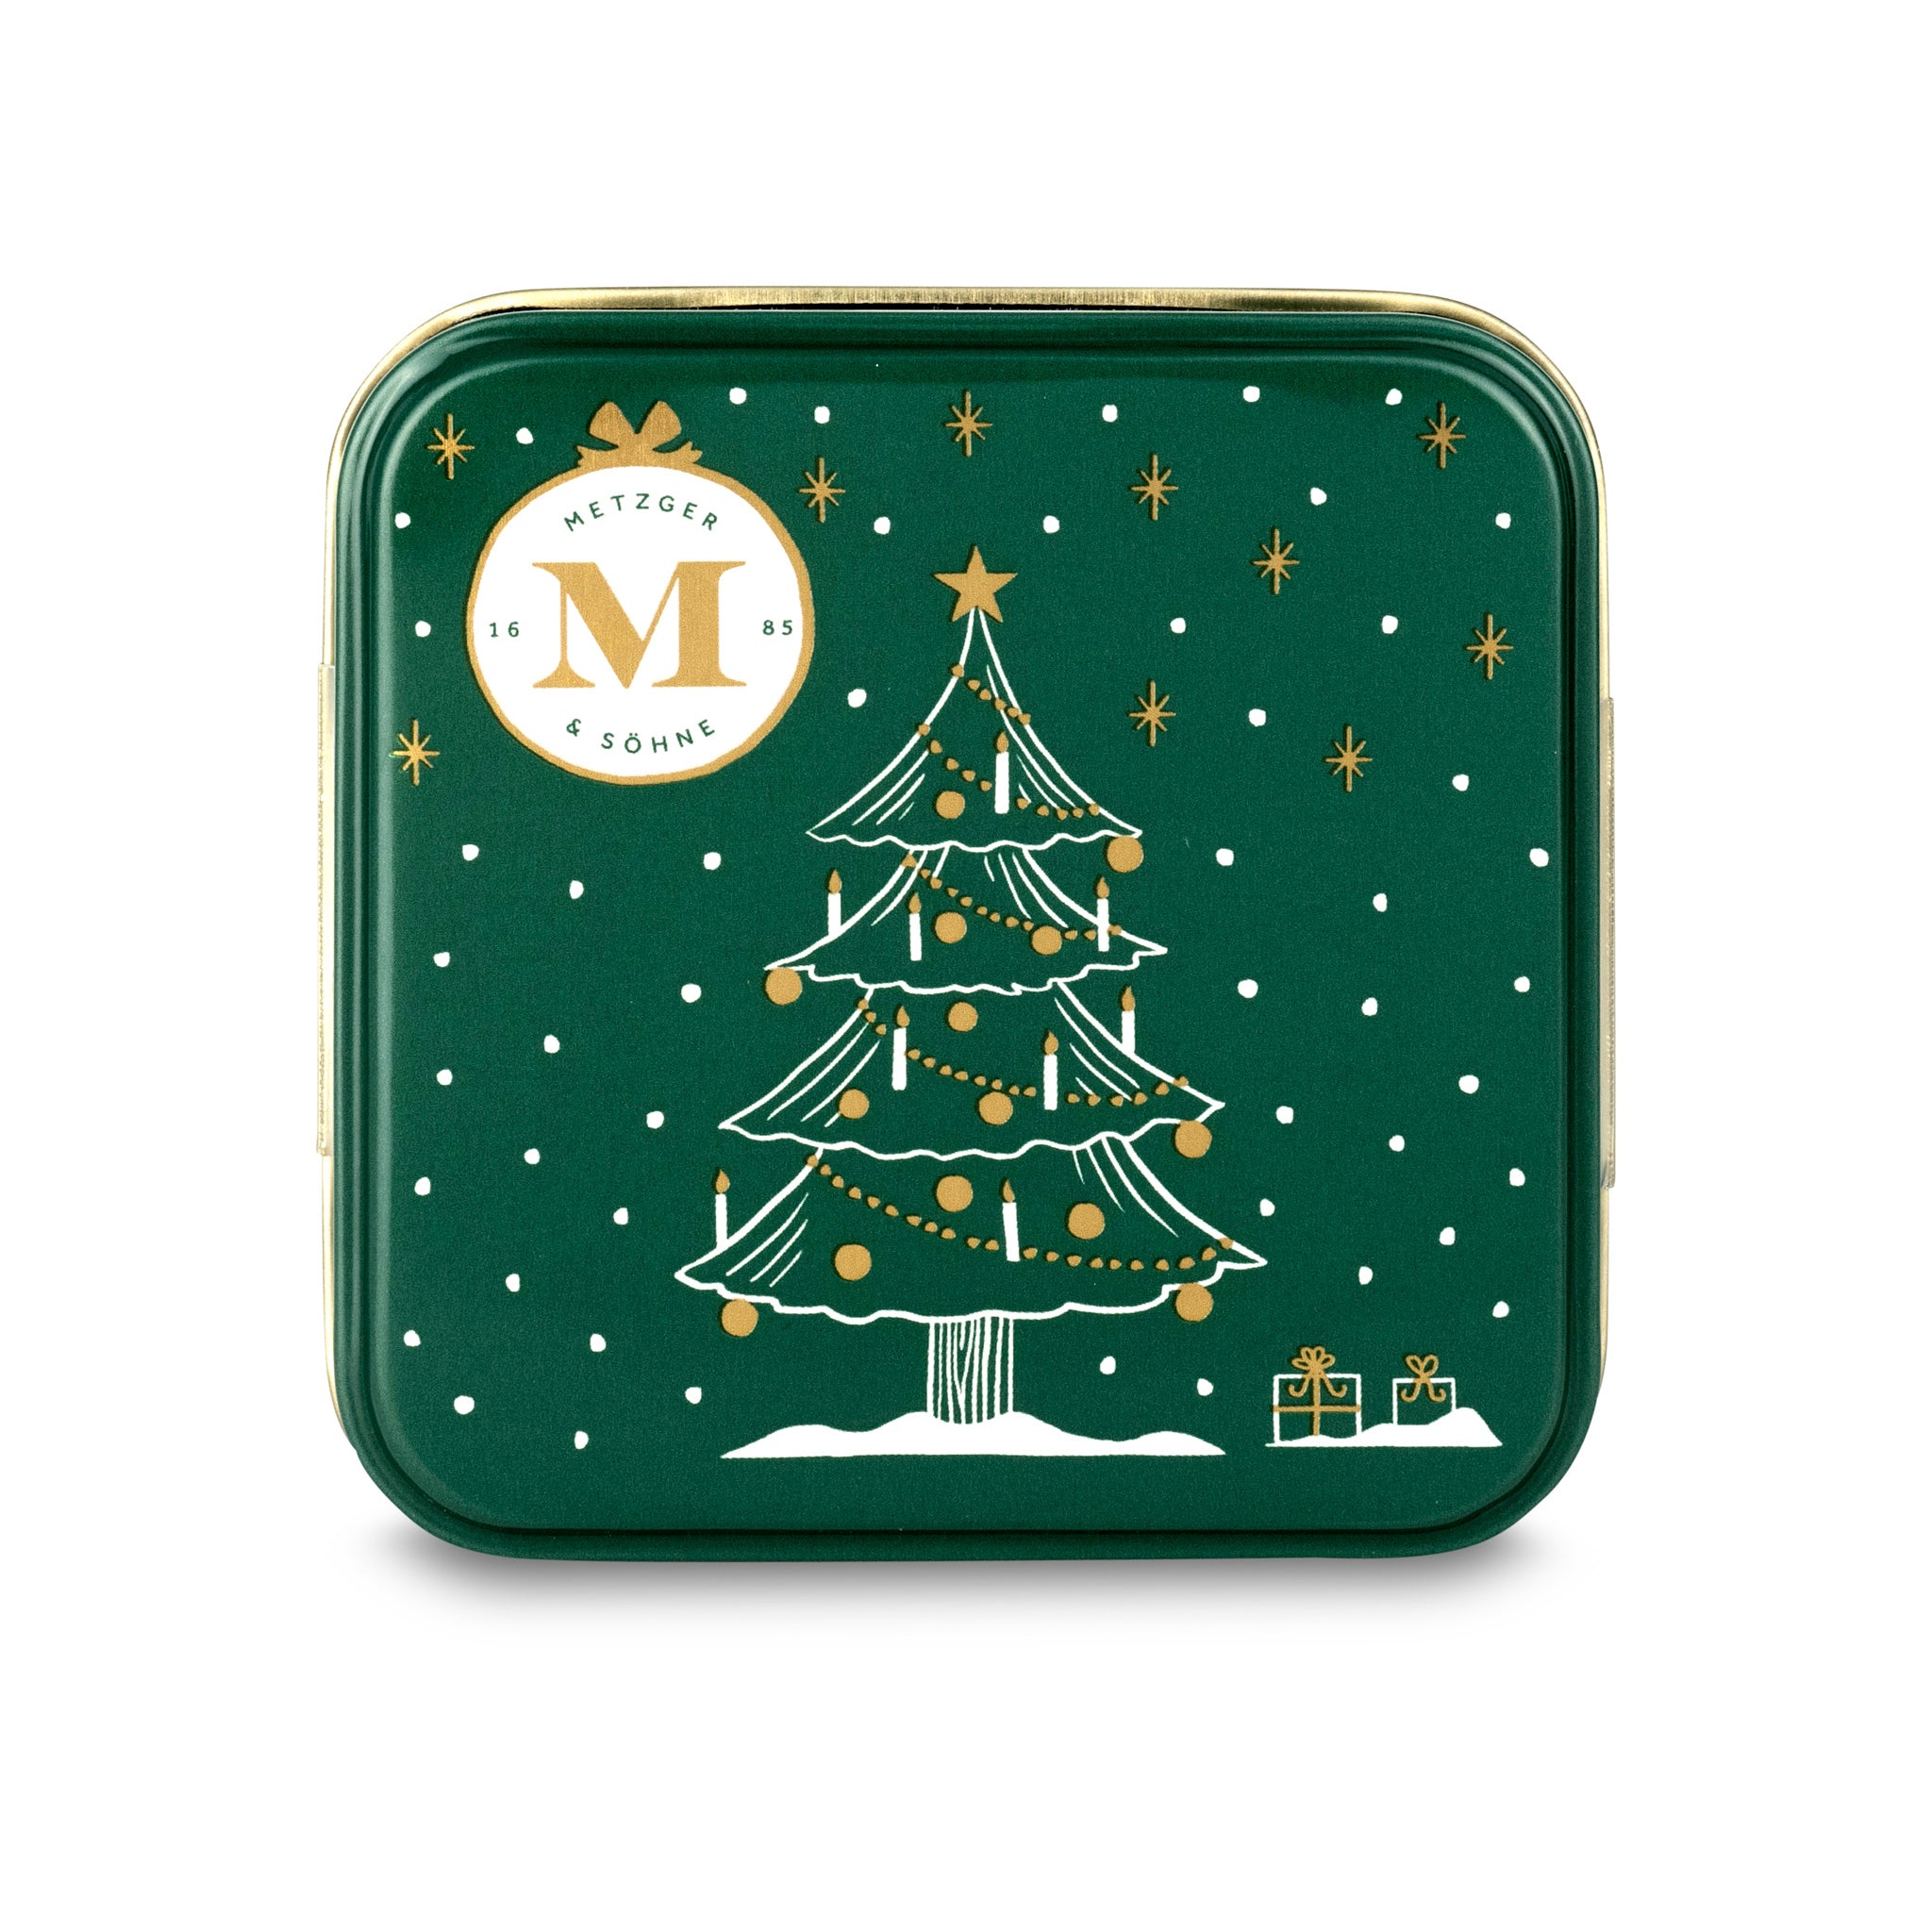 Adorable Lebkuchen 'honey cake' Christmas tin in green filled with 4 different Lebkuchen pralines